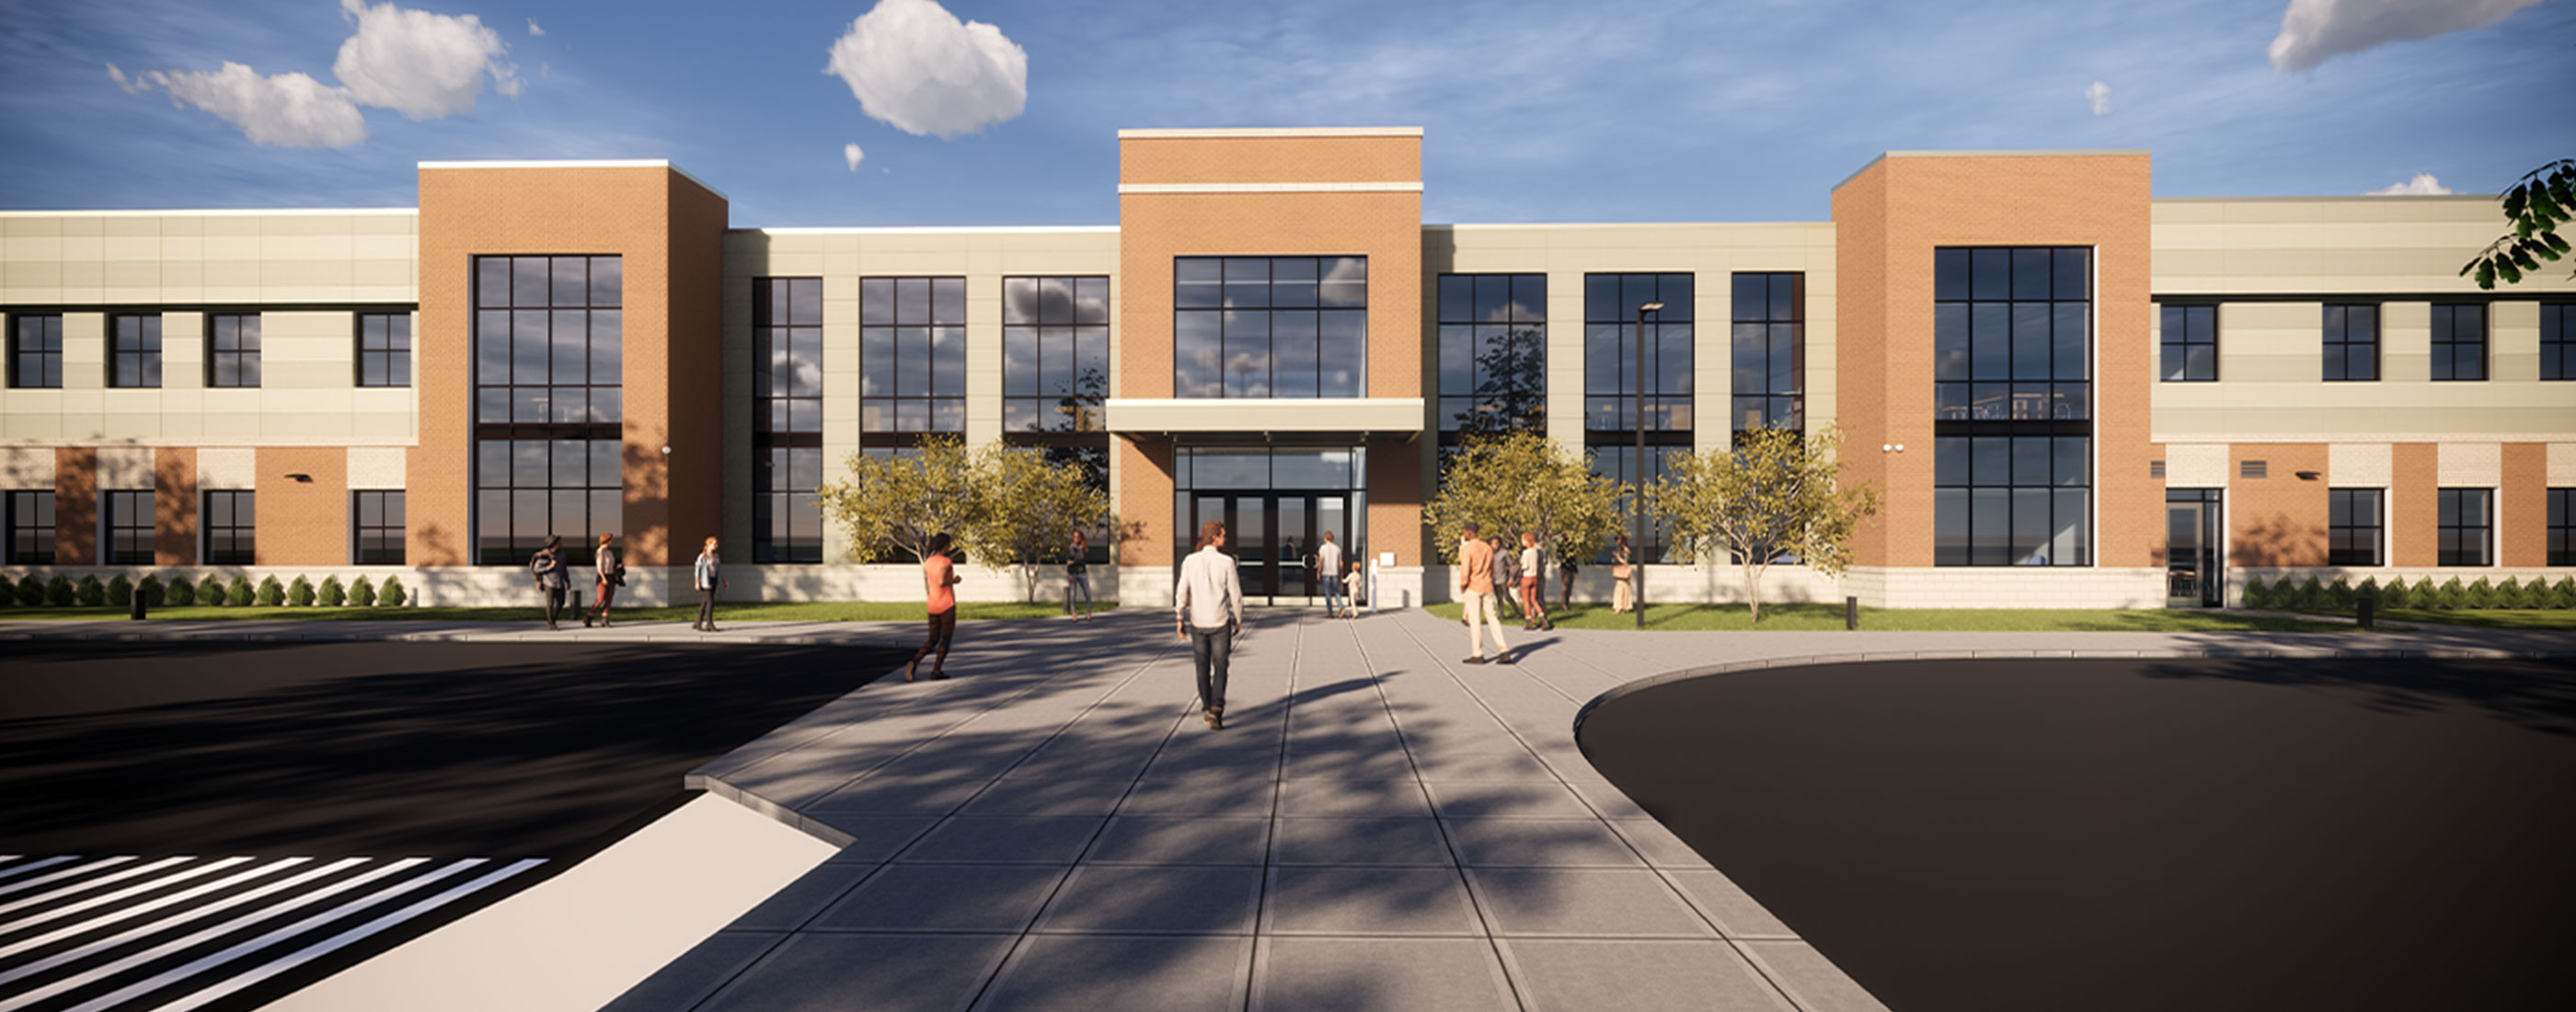 Front exterior rendering view of the newly designed Jerome Middle School in Dublin, OH.